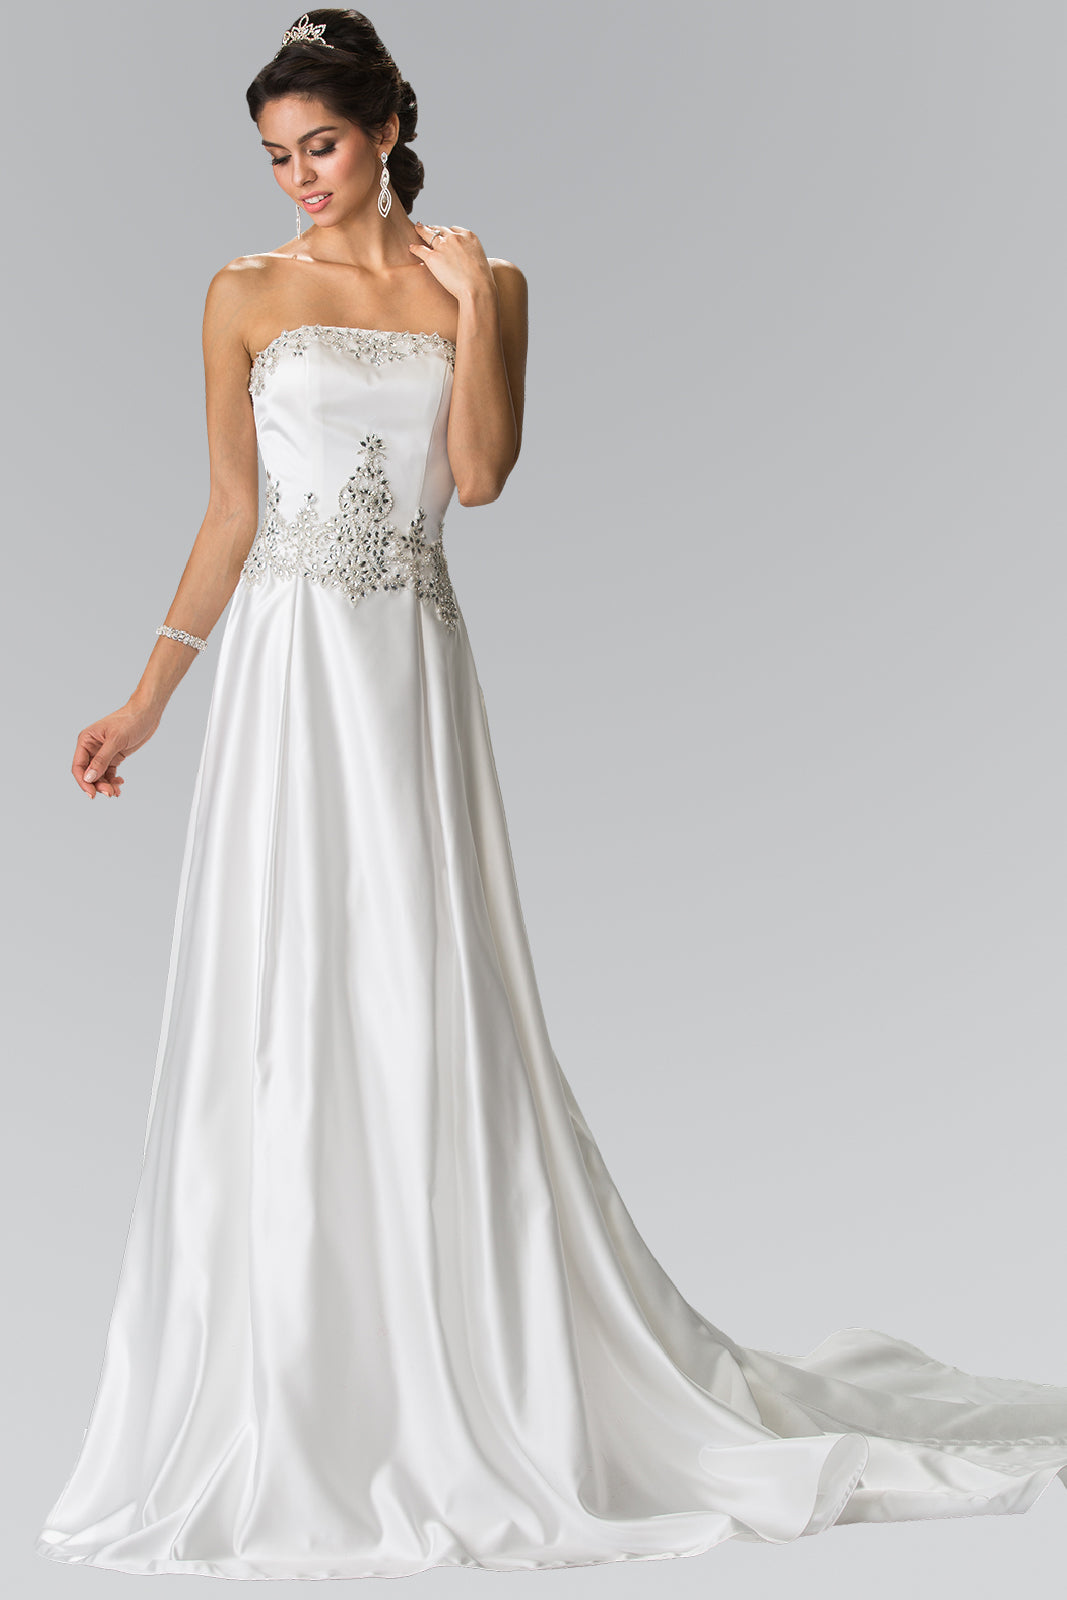 Jewels Embellished Strapless Wedding Dress with Tail-smcdress